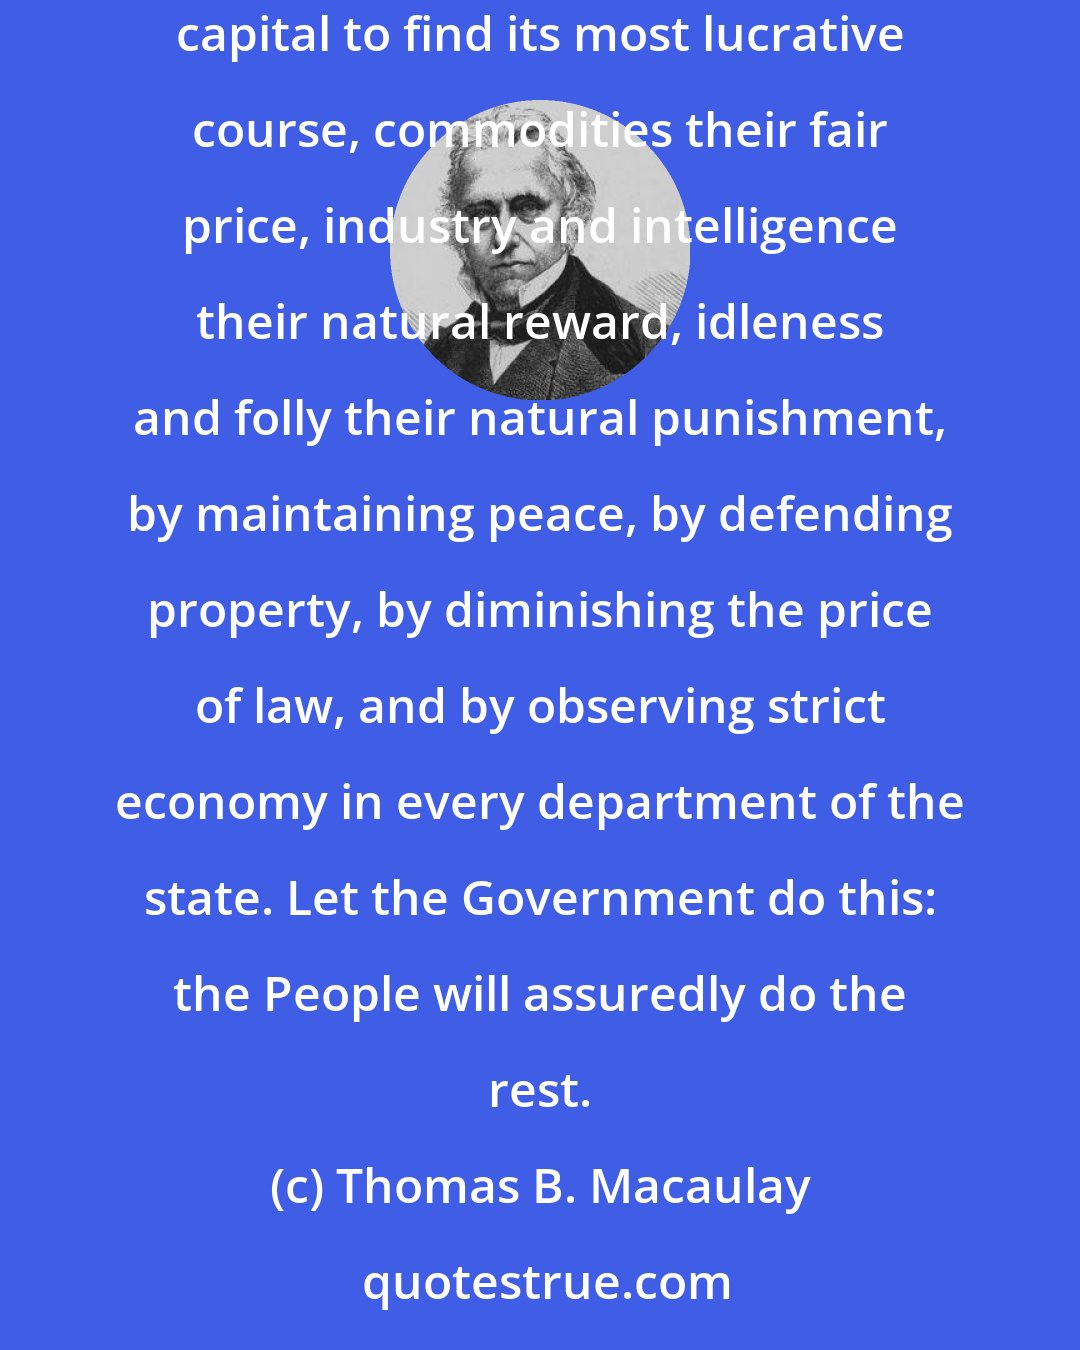 Thomas B. Macaulay: Our rulers will best promote the improvement of the nation by strictly confining themselves to their own legitimate duties, by leaving capital to find its most lucrative course, commodities their fair price, industry and intelligence their natural reward, idleness and folly their natural punishment, by maintaining peace, by defending property, by diminishing the price of law, and by observing strict economy in every department of the state. Let the Government do this: the People will assuredly do the rest.